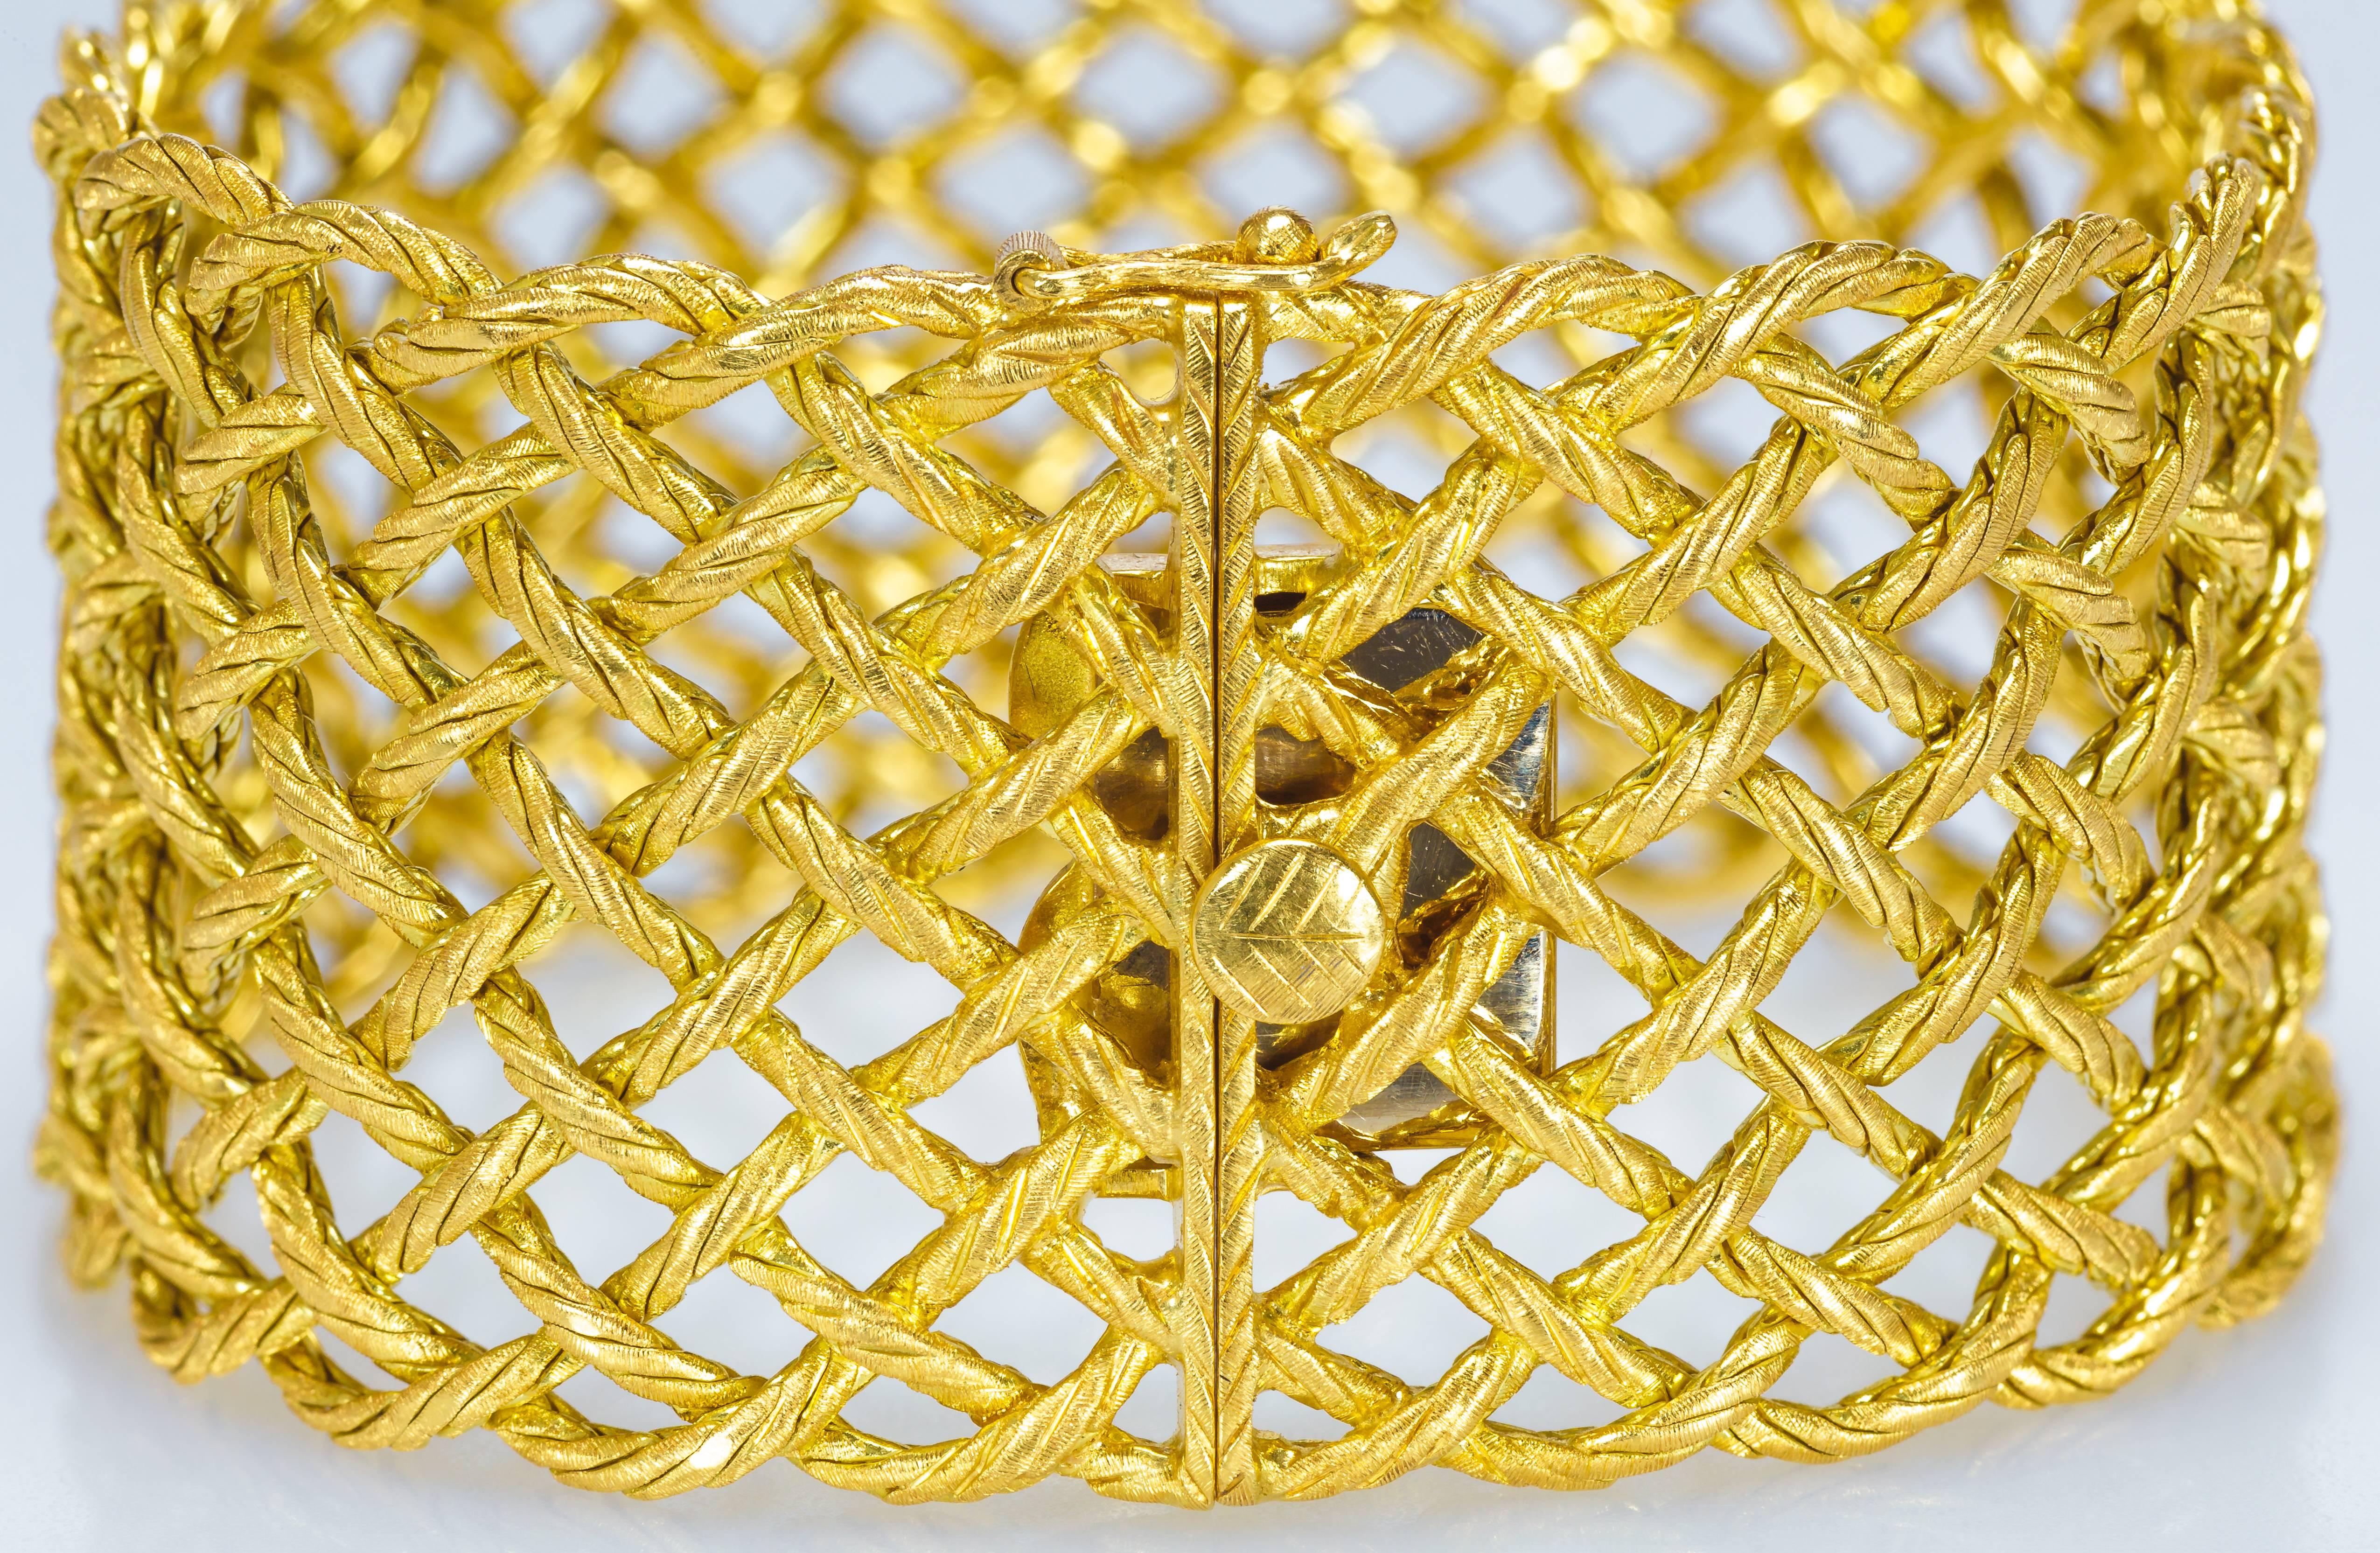 This Buccellati Crepe de Chine bracelet features 12 18K yellow gold interwoven chains.  It has a push-button release with a safety clasp.  The bracelet measures 7 3/8